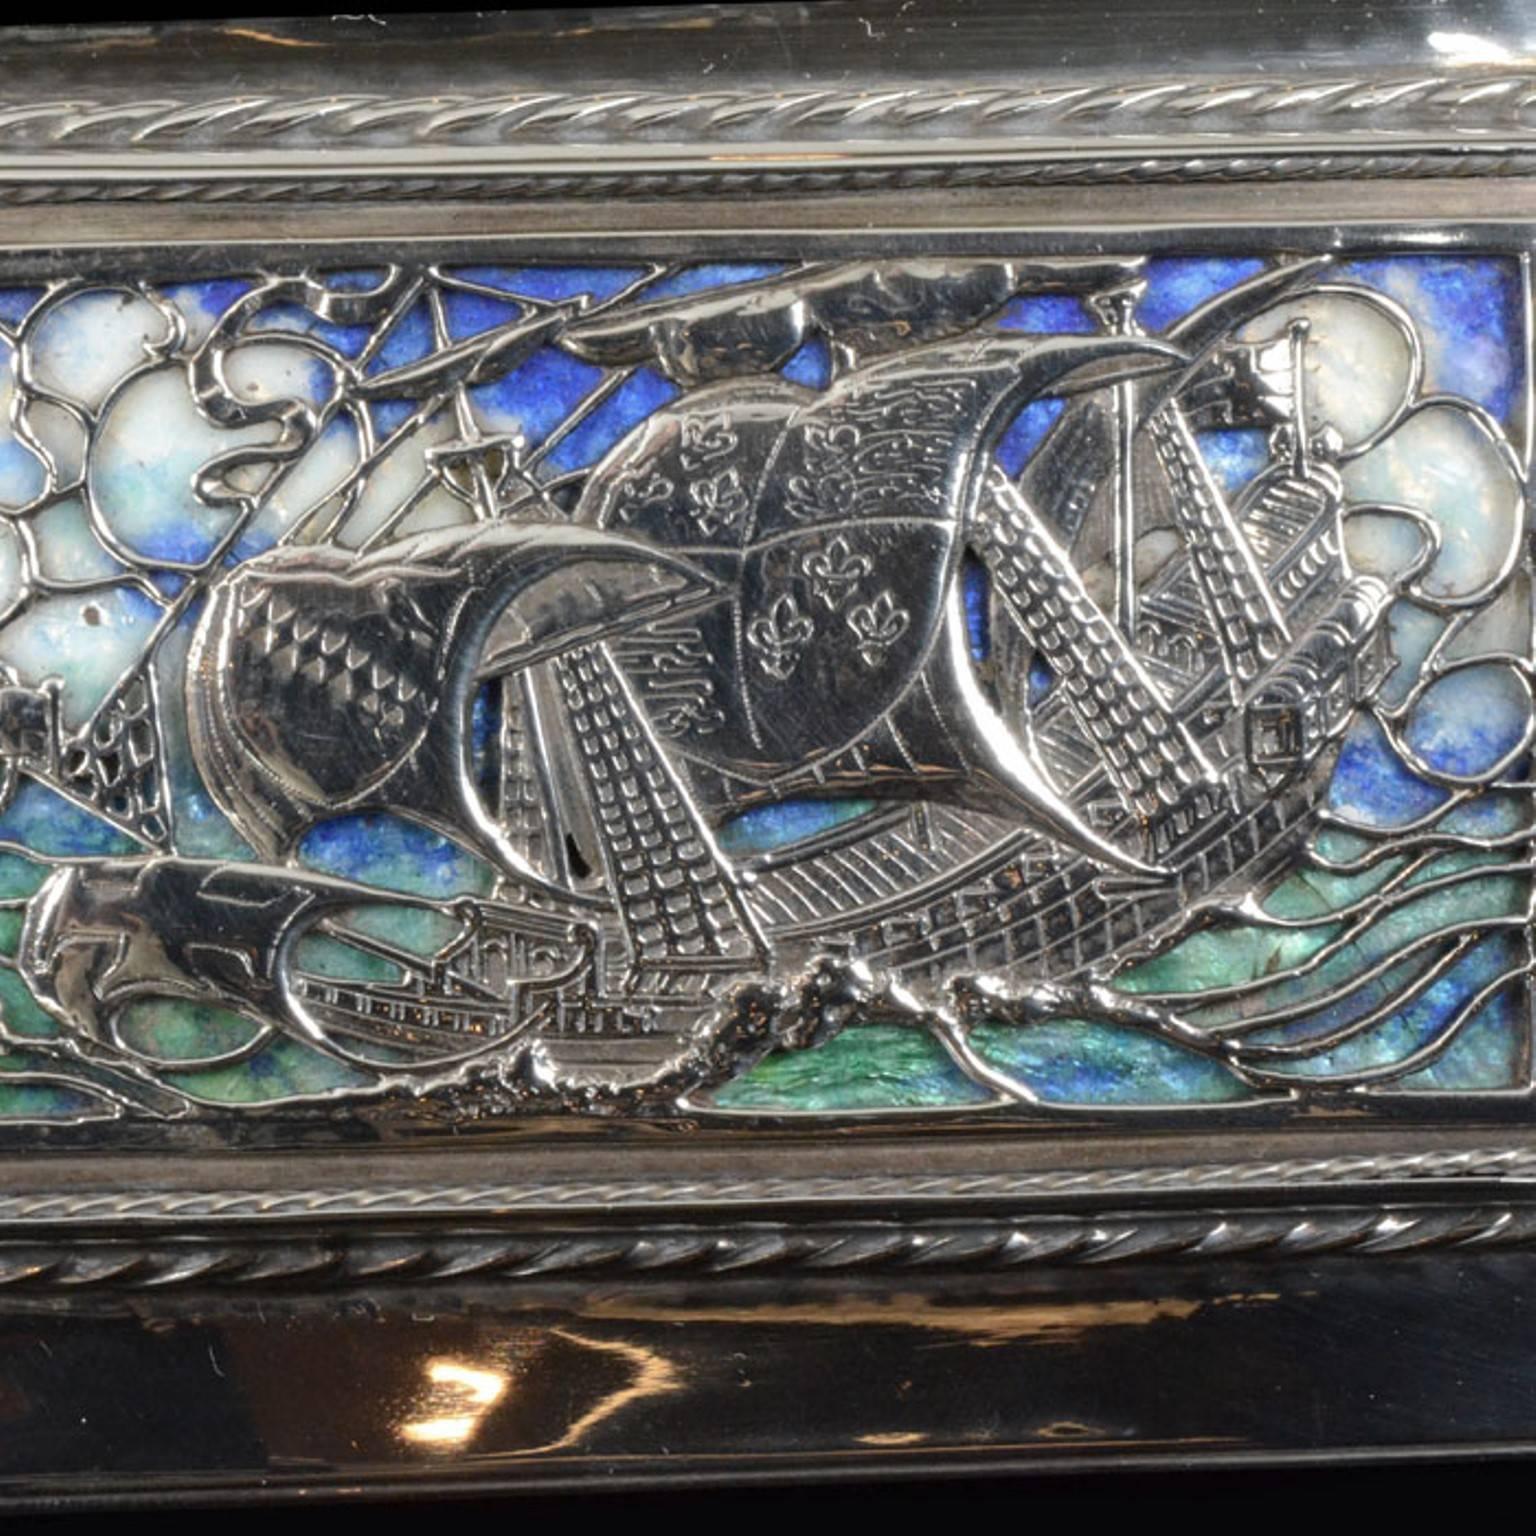 Rectangular silver box with applied twisted rope decoration bordering an enamel galleon at sea, the interior is wood lined, the base inscribed OMAR RAMSDEN ME FECIT

length 13.2cm  x 9.5cm wide

